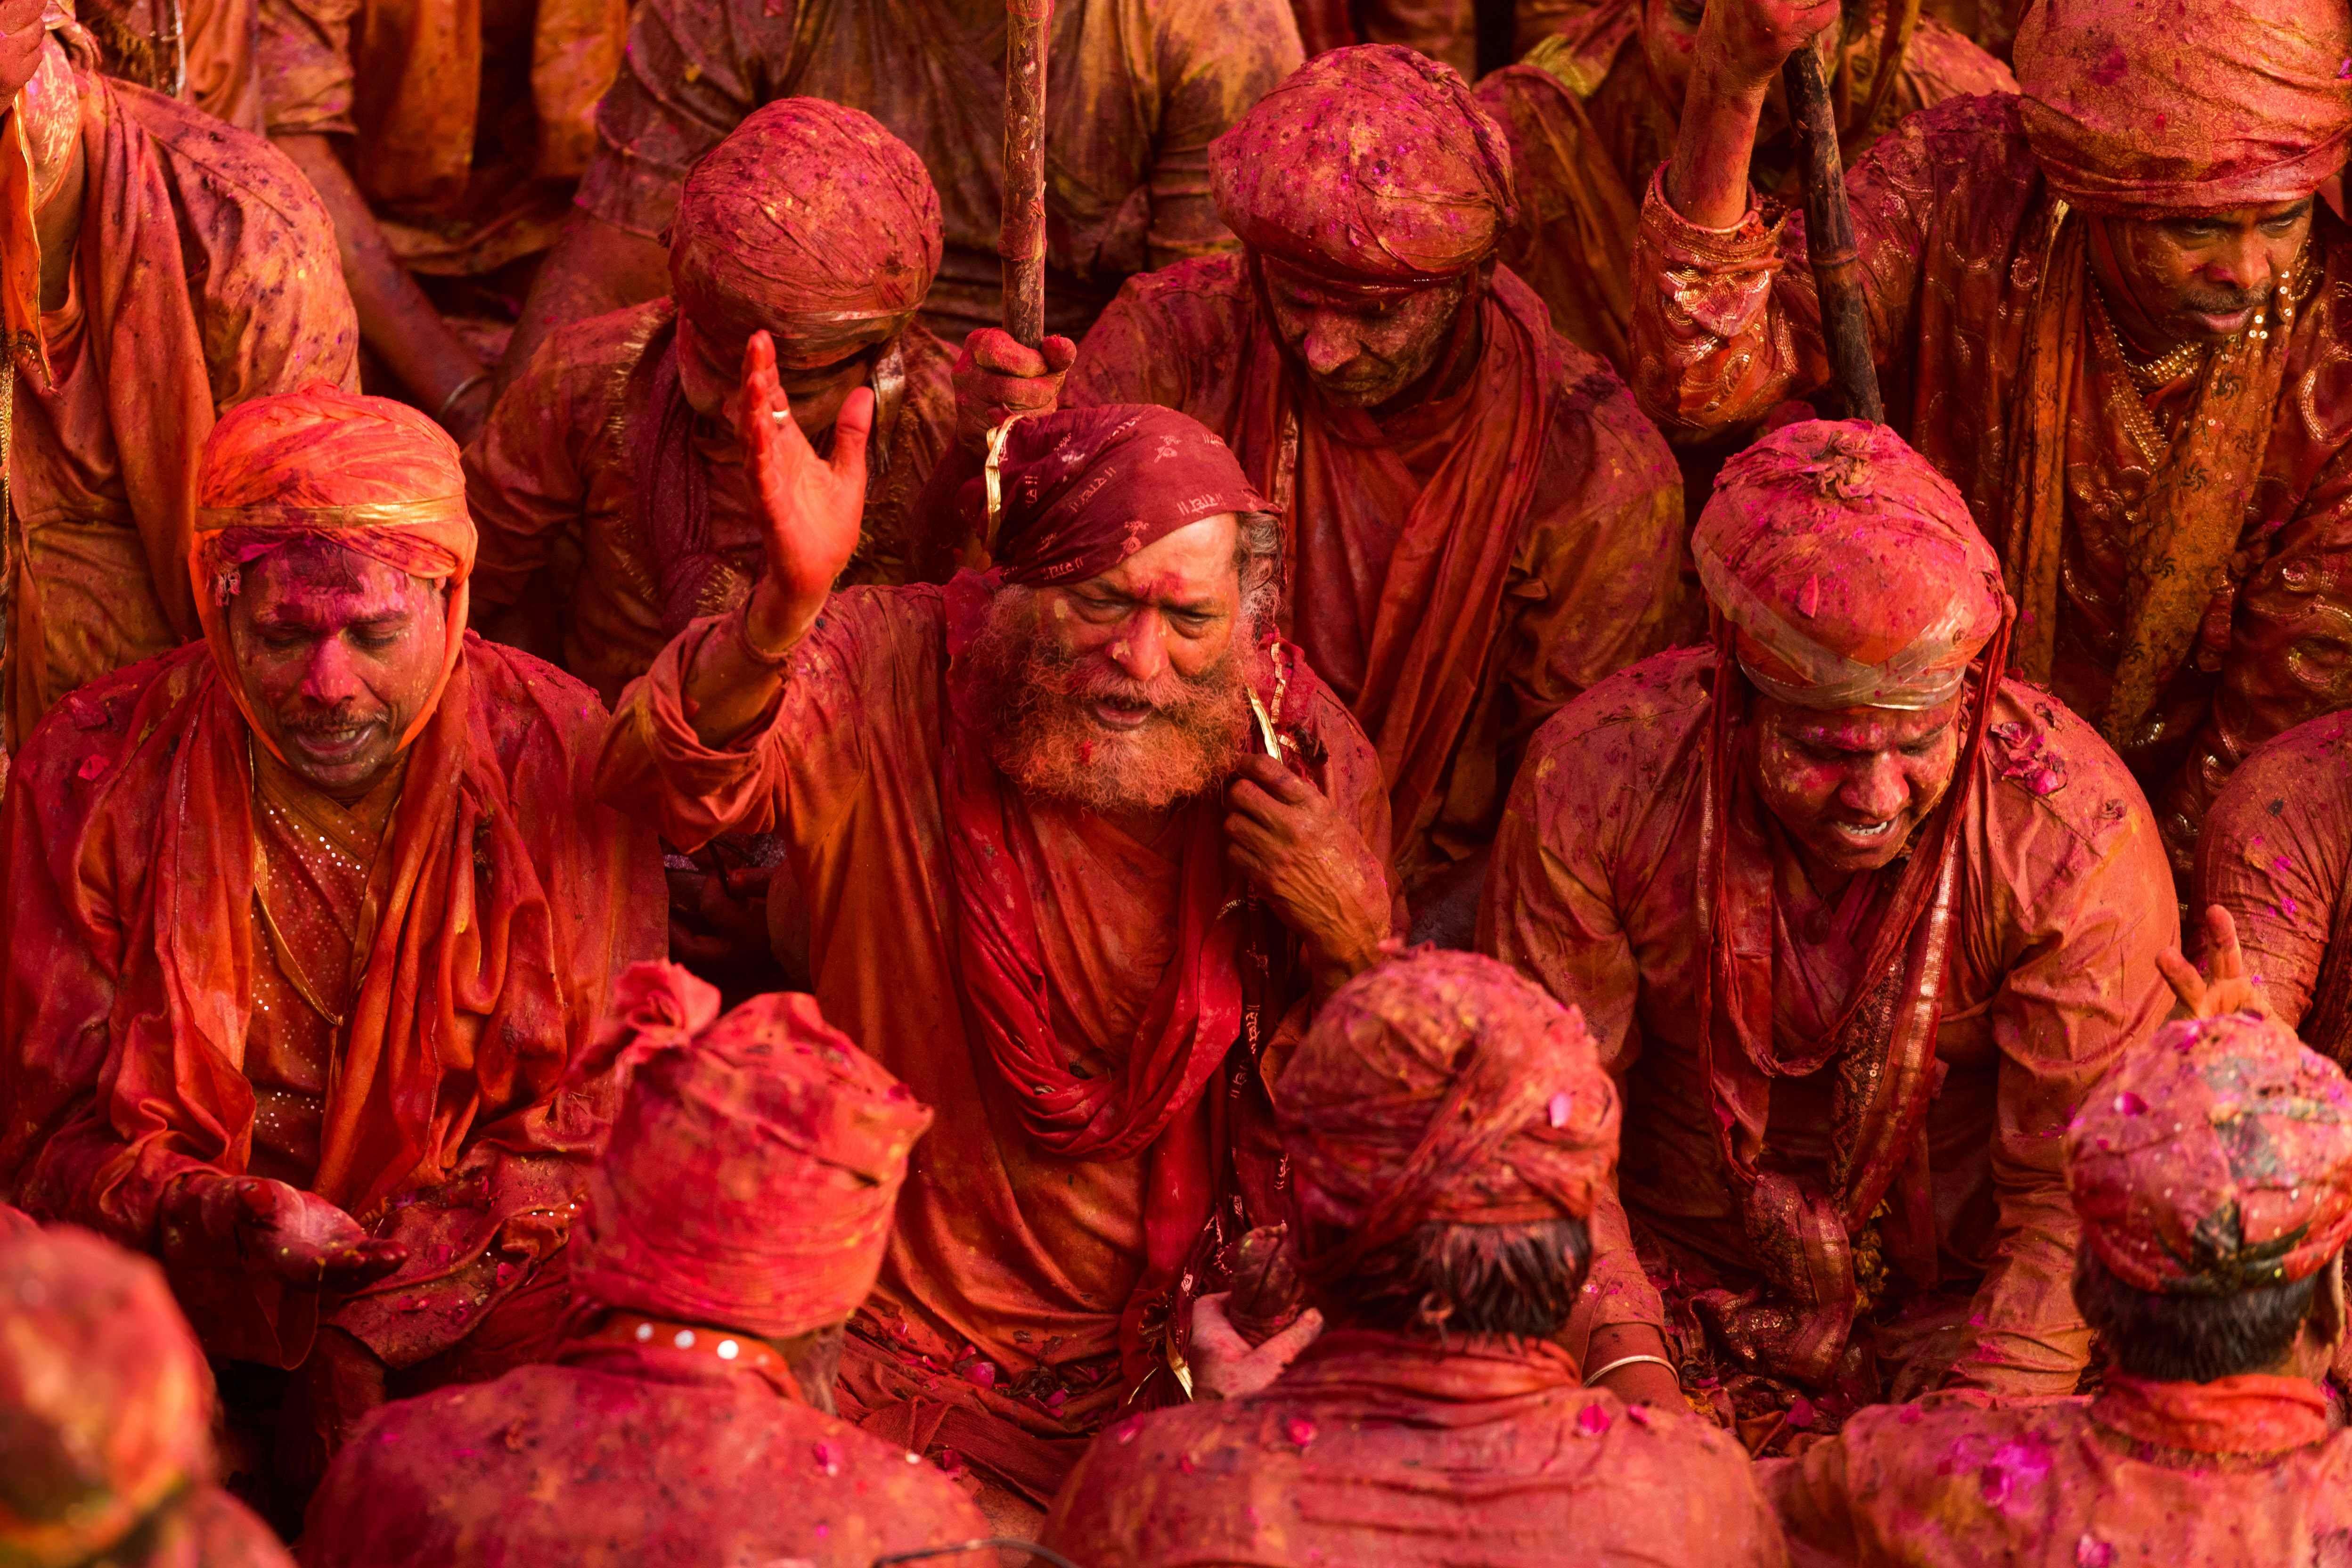 Indian revellers covered in coloured powder sit inside a temple during prayers held as part of the Lathmar Holi celebrations in the village of Nandgaon on March 18, 2016.  Holi, also called the Festival of Colours, is a popular Hindu spring festival observed in India at the end of the winter season on the last full moon day of the lunar month. / AFP PHOTO / Francois Xavier MARIT